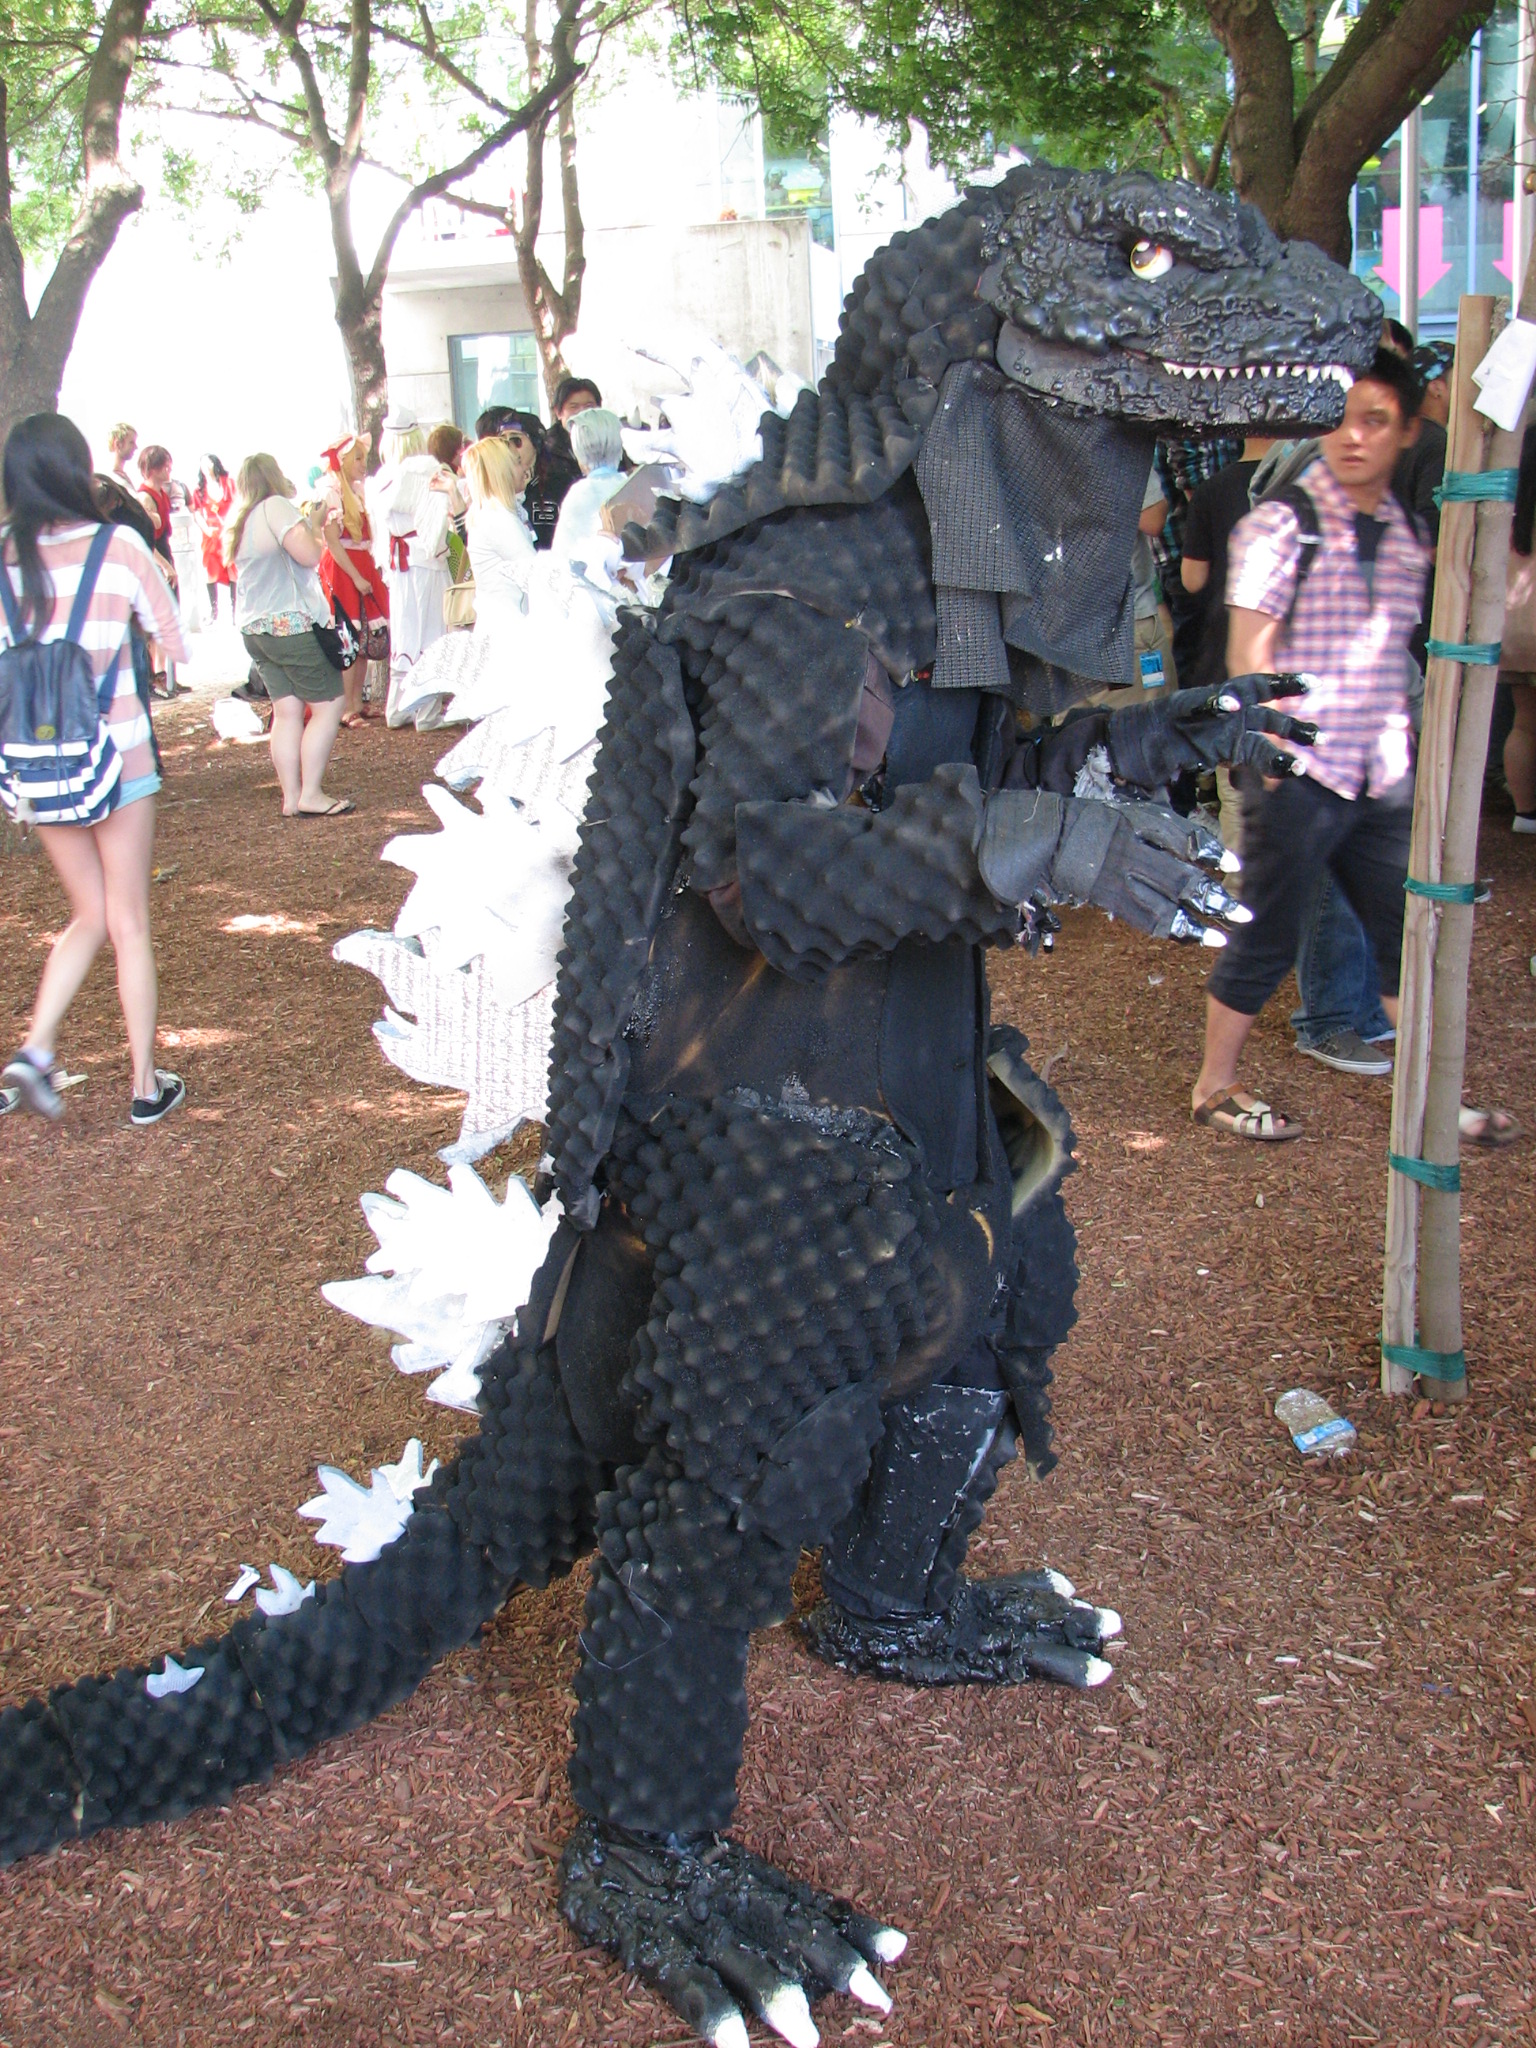 Somebody actually made their own Godzilla costume. 